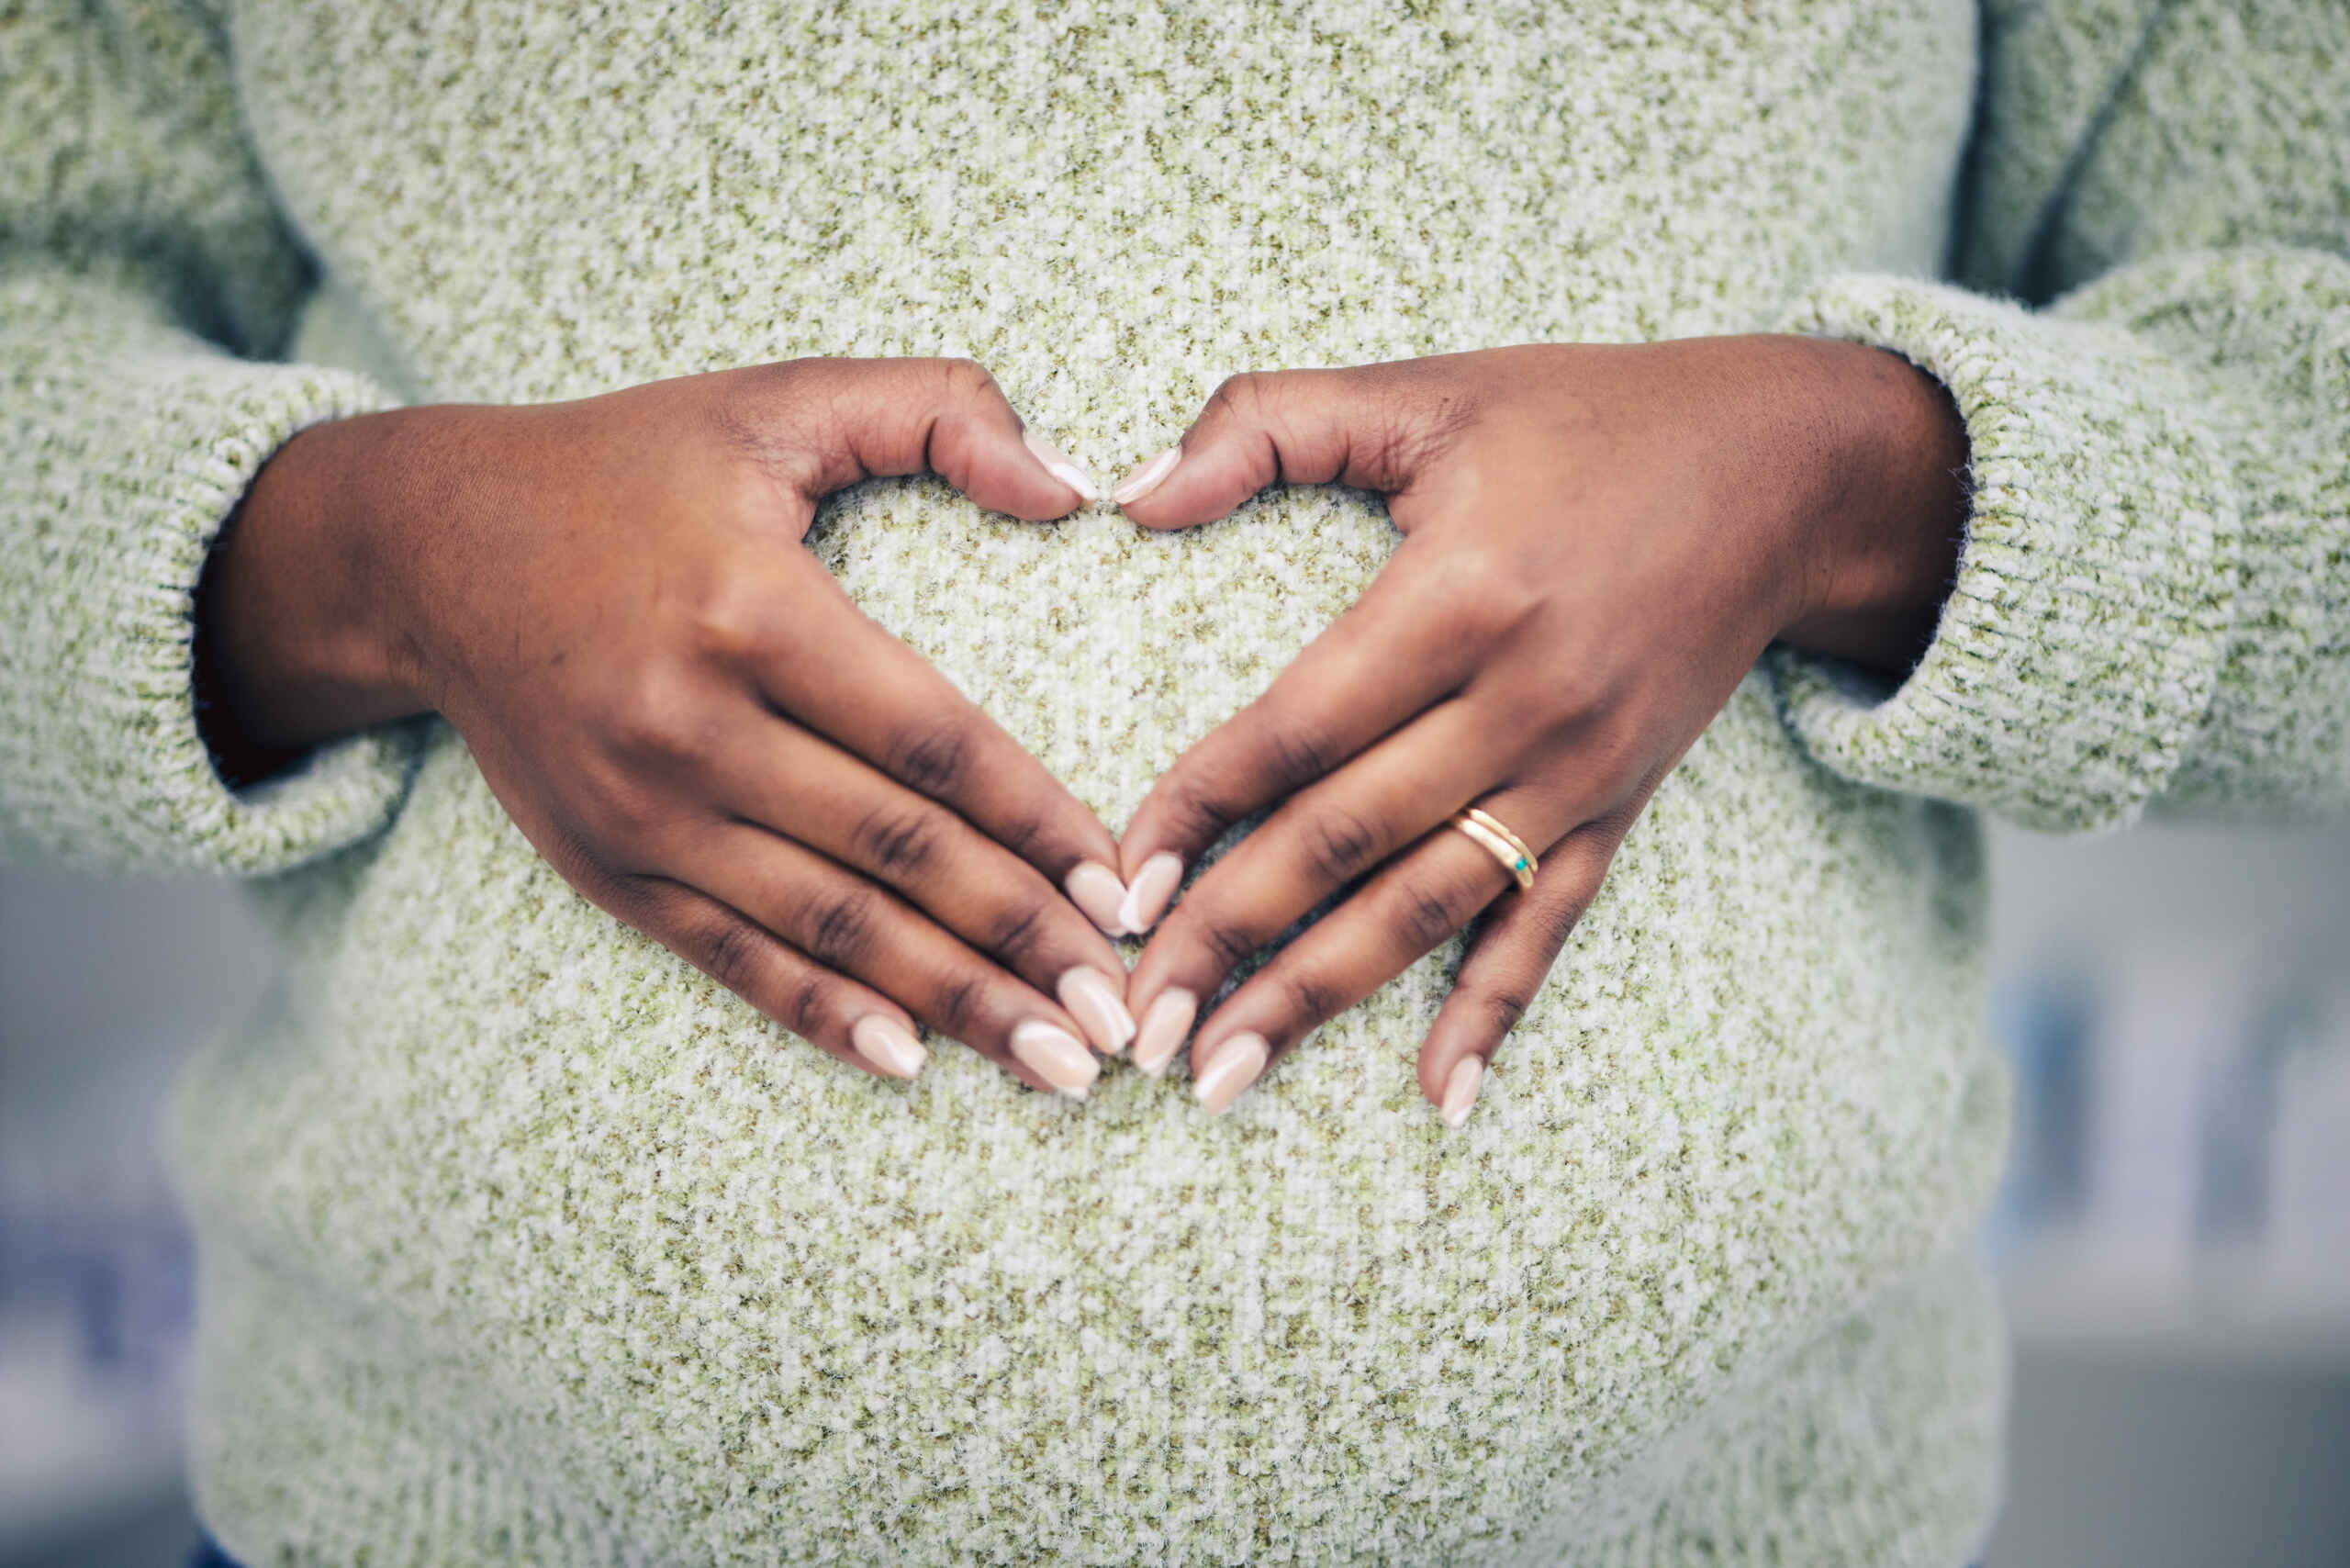 Spotlight on Infant Mortality in South Africa